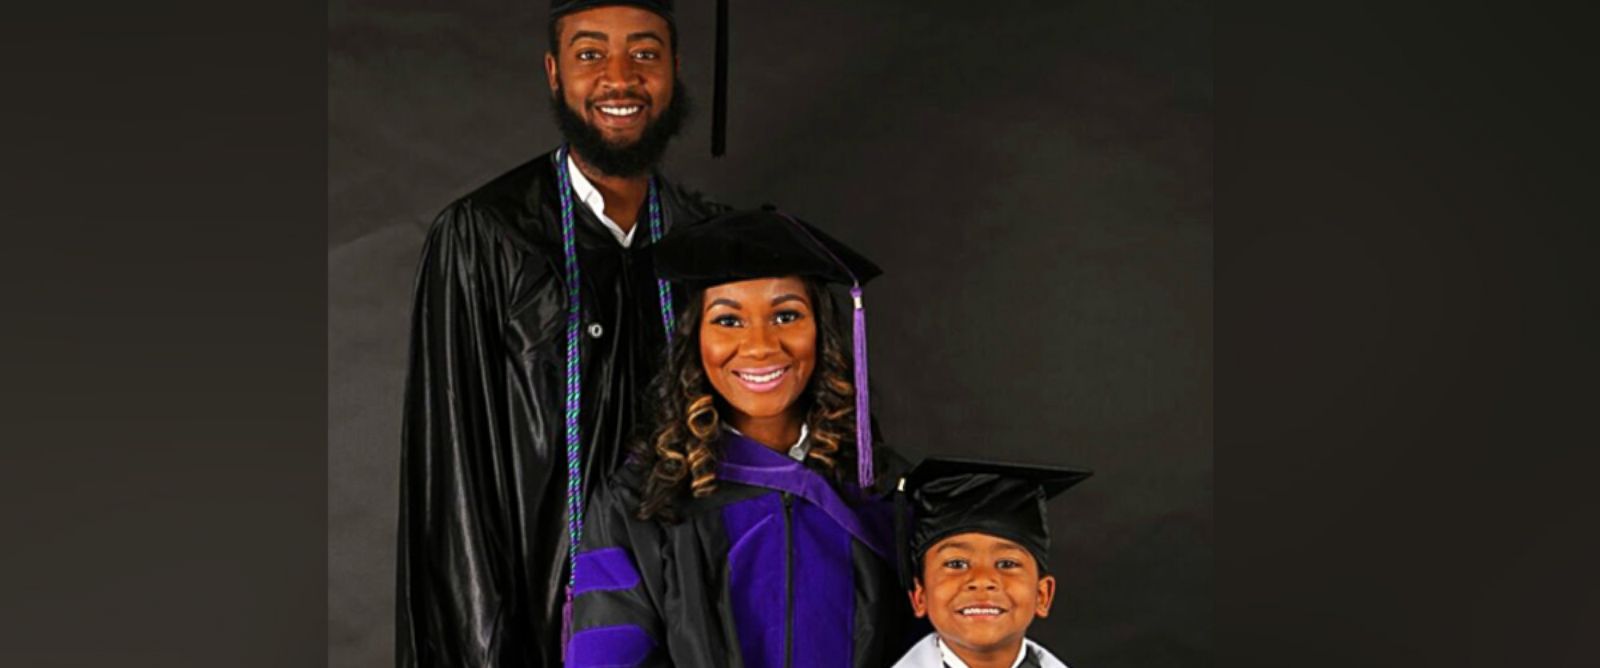 PHOTO: A photo of the Myles family, who are all graduating in May, went viral after mom Shenitria Myles posted it to Facebook.